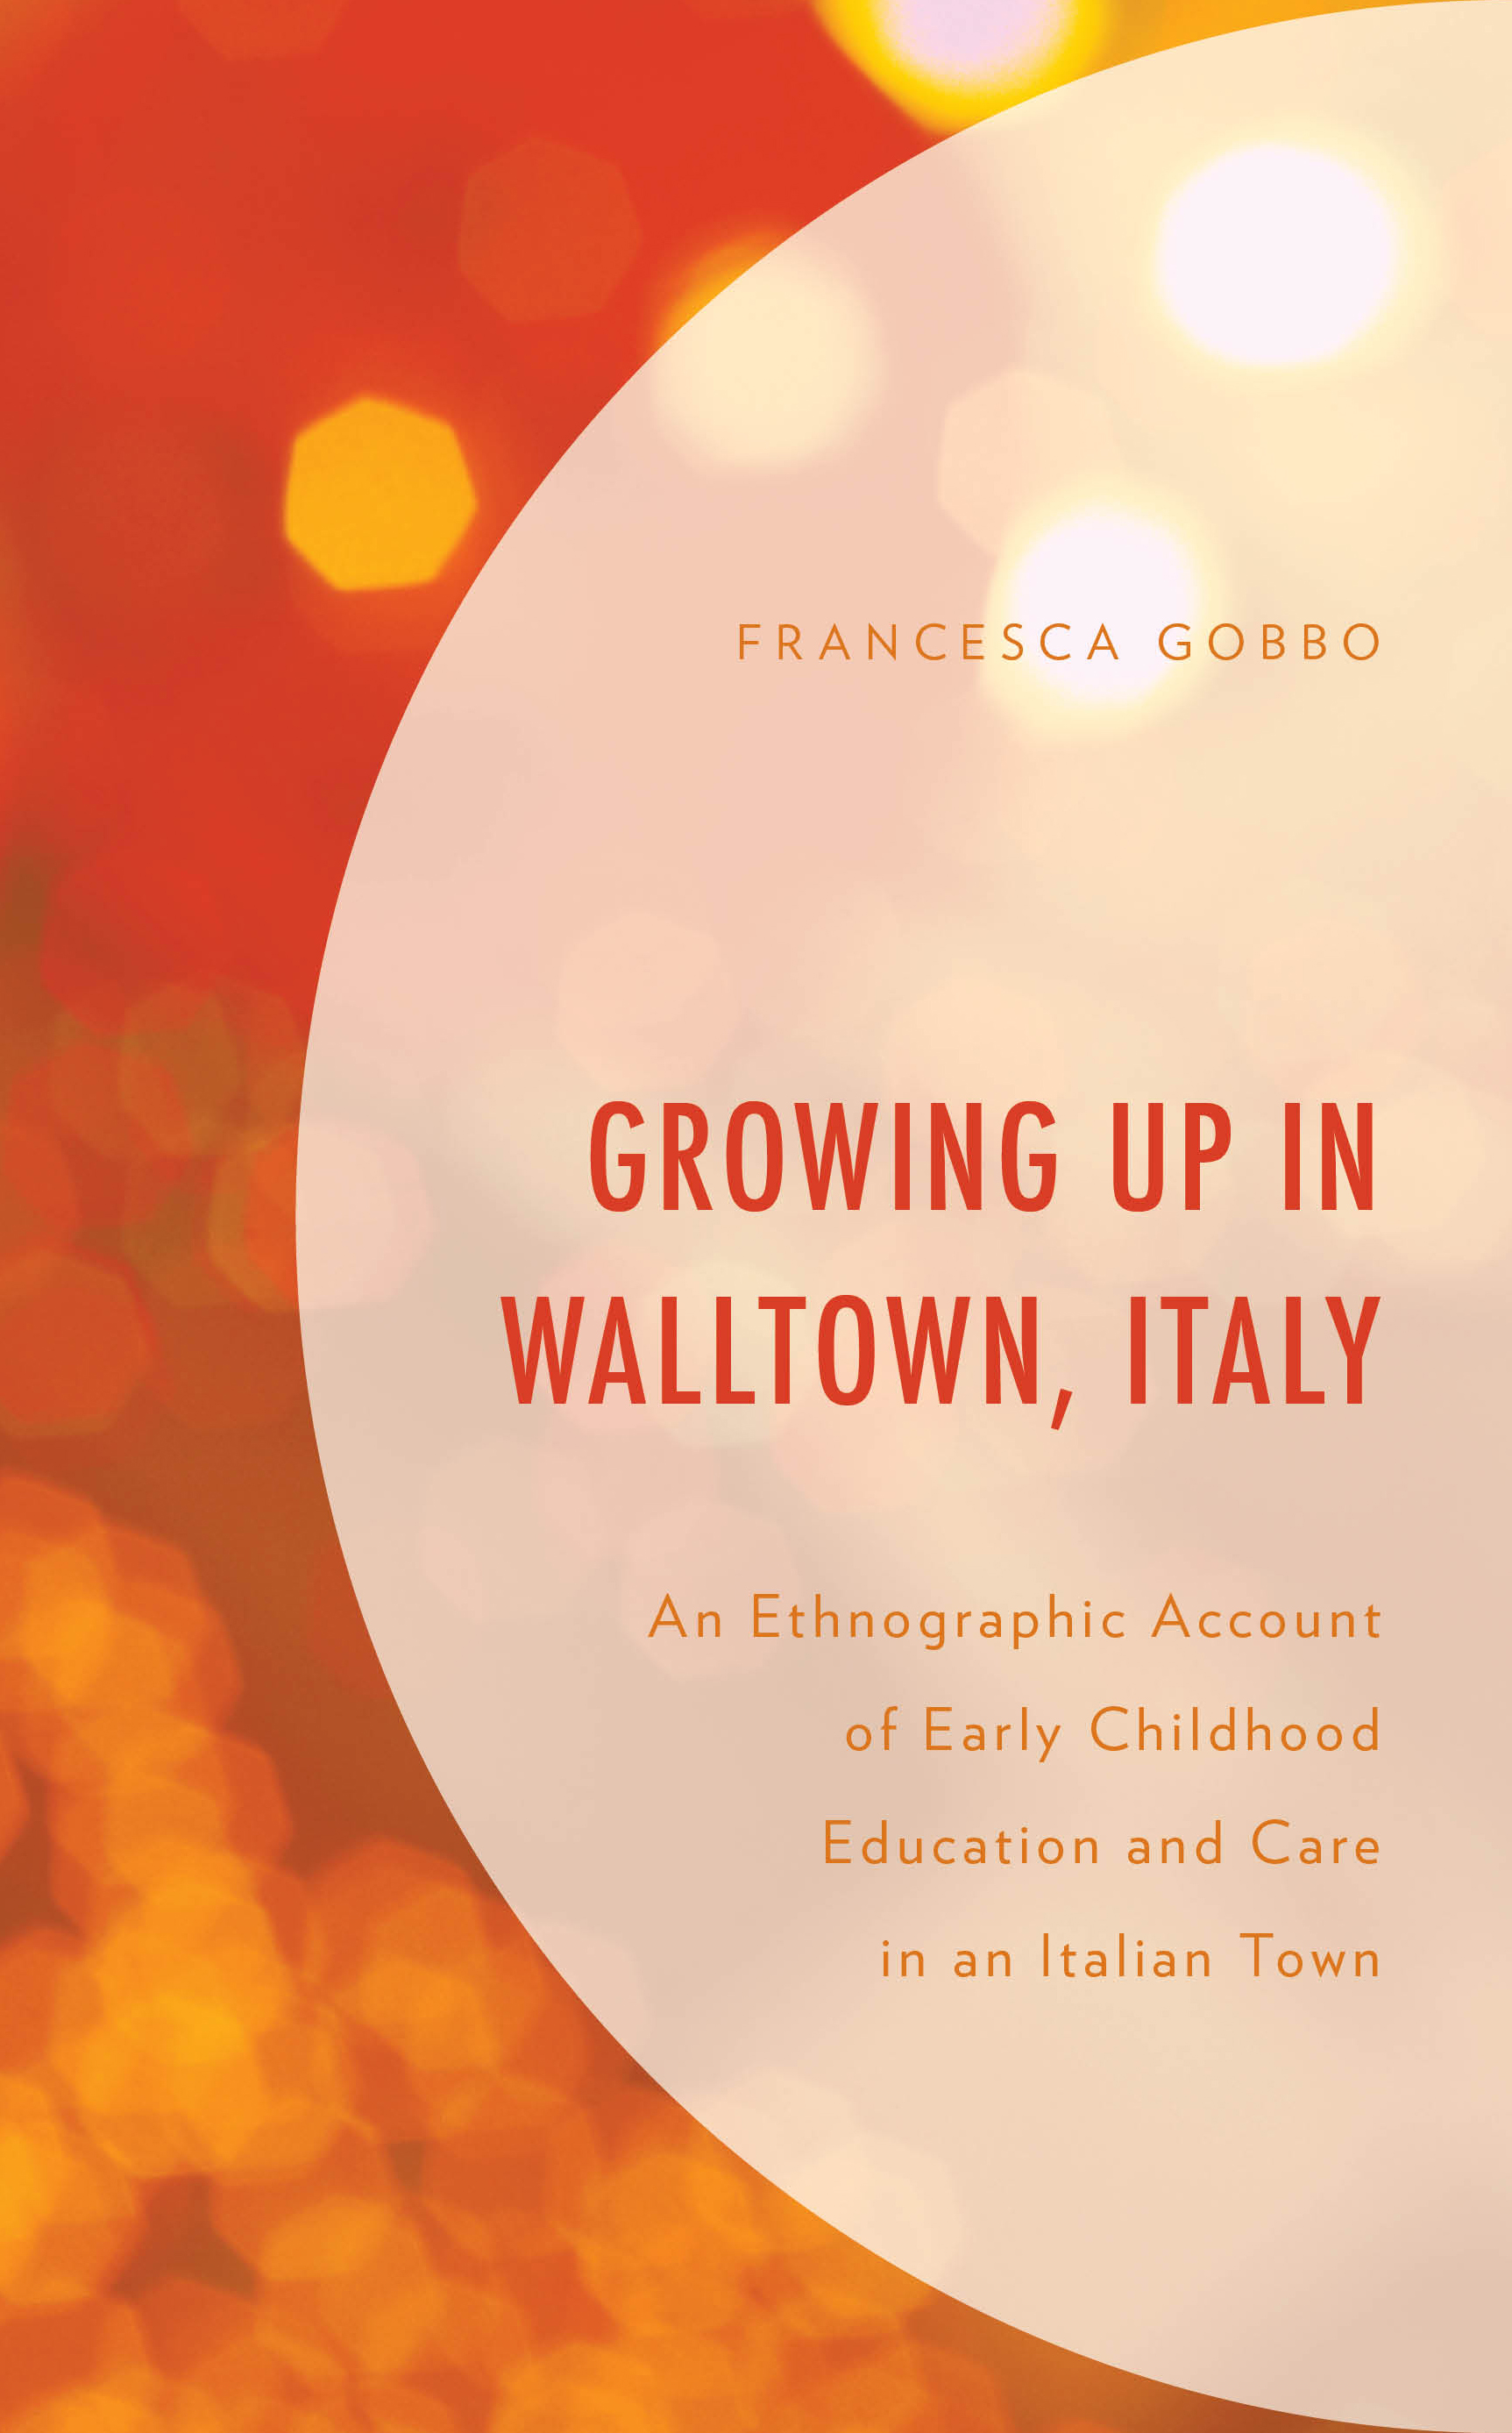 Growing Up in Walltown, Italy: An Ethnographic Account of Early Childhood Education and Care in an Italian Town